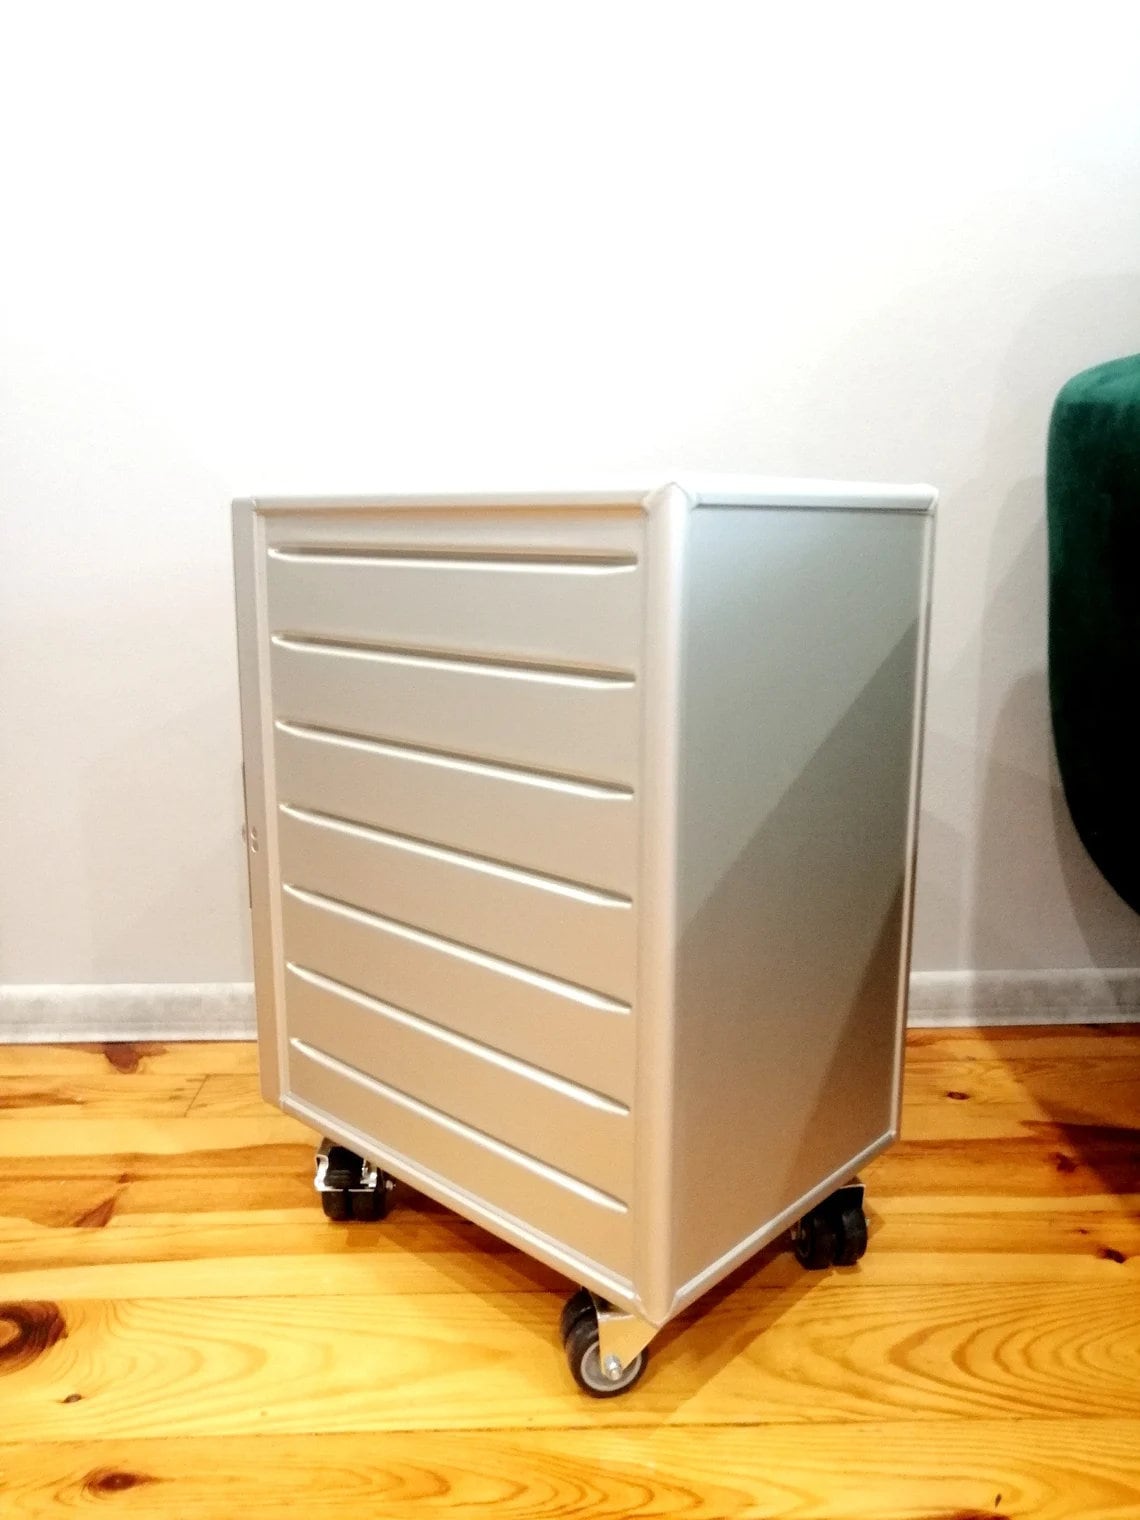 New Unique Airline Galley Container | Travels & Airlines Design | Aviation Nightstand, Cabinet, Trolley with Drawers